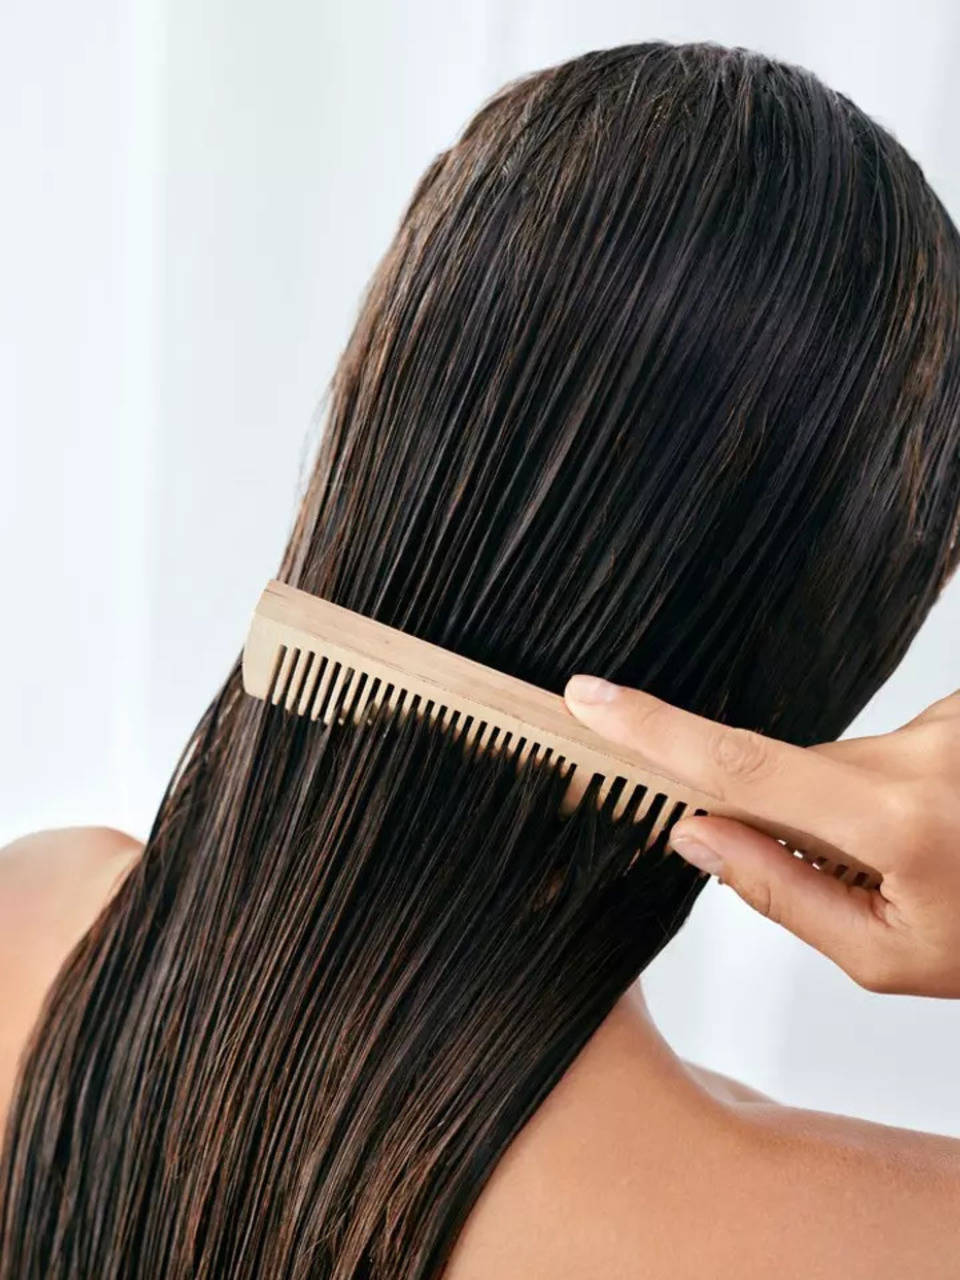 Keratin Vs Biotin: What should you choose for your hair? | Times of India